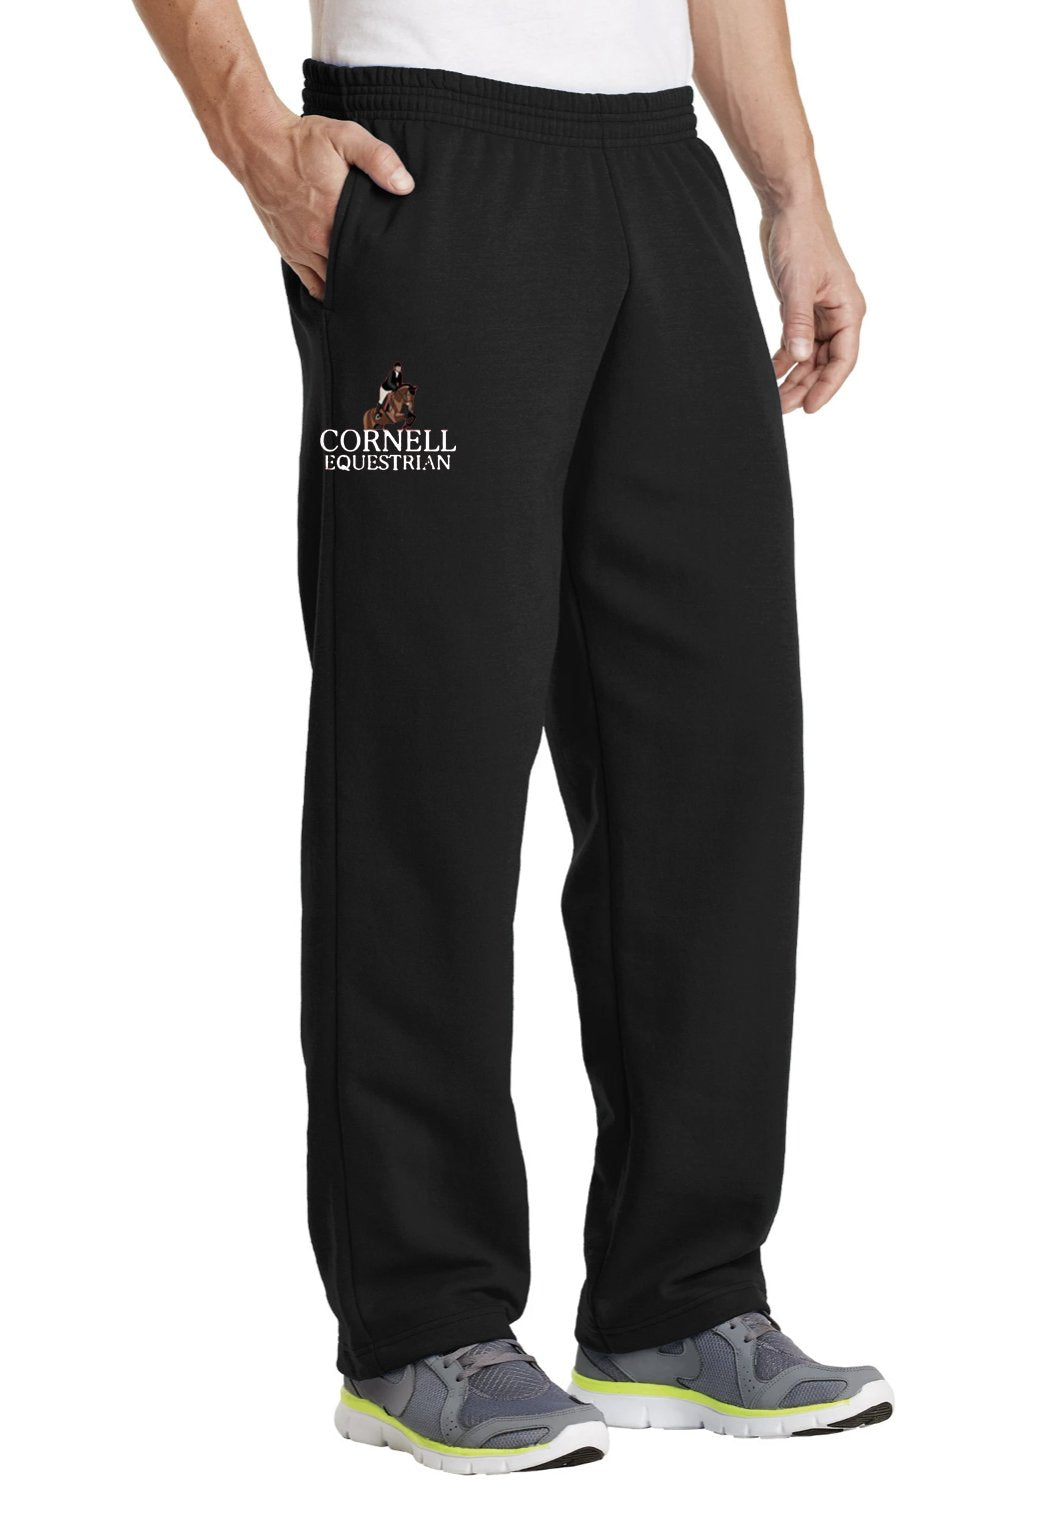 Cornell Equestrian Core Fleece Sweatpant with Pockets (Unisex) - Red or Black